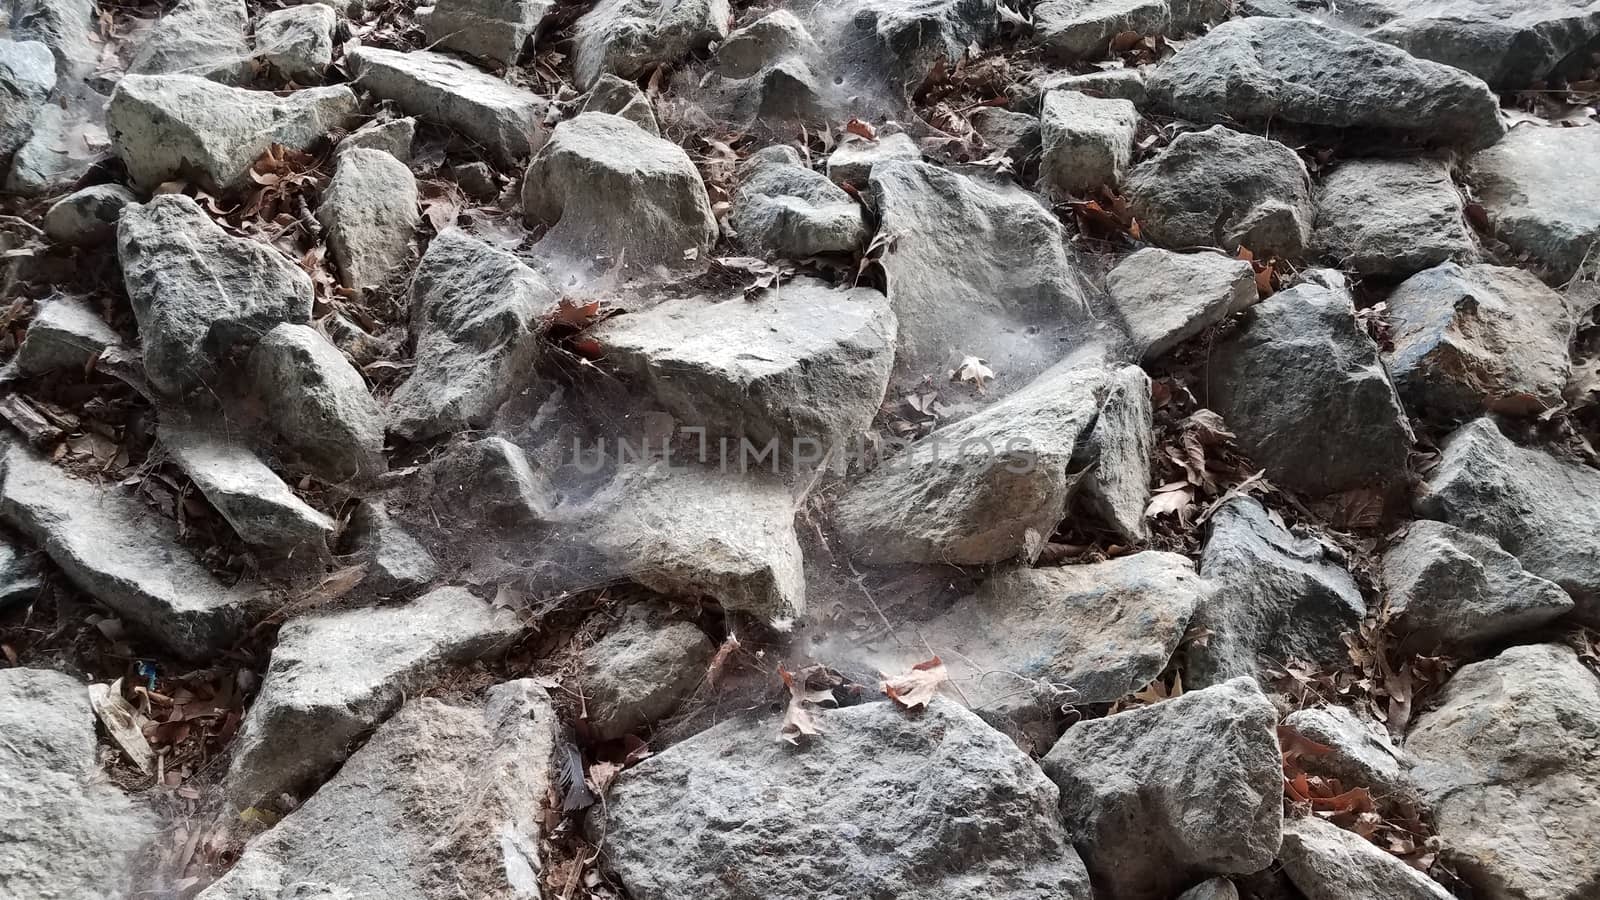 grey rocks or stones or boulders with spider webs by stockphotofan1